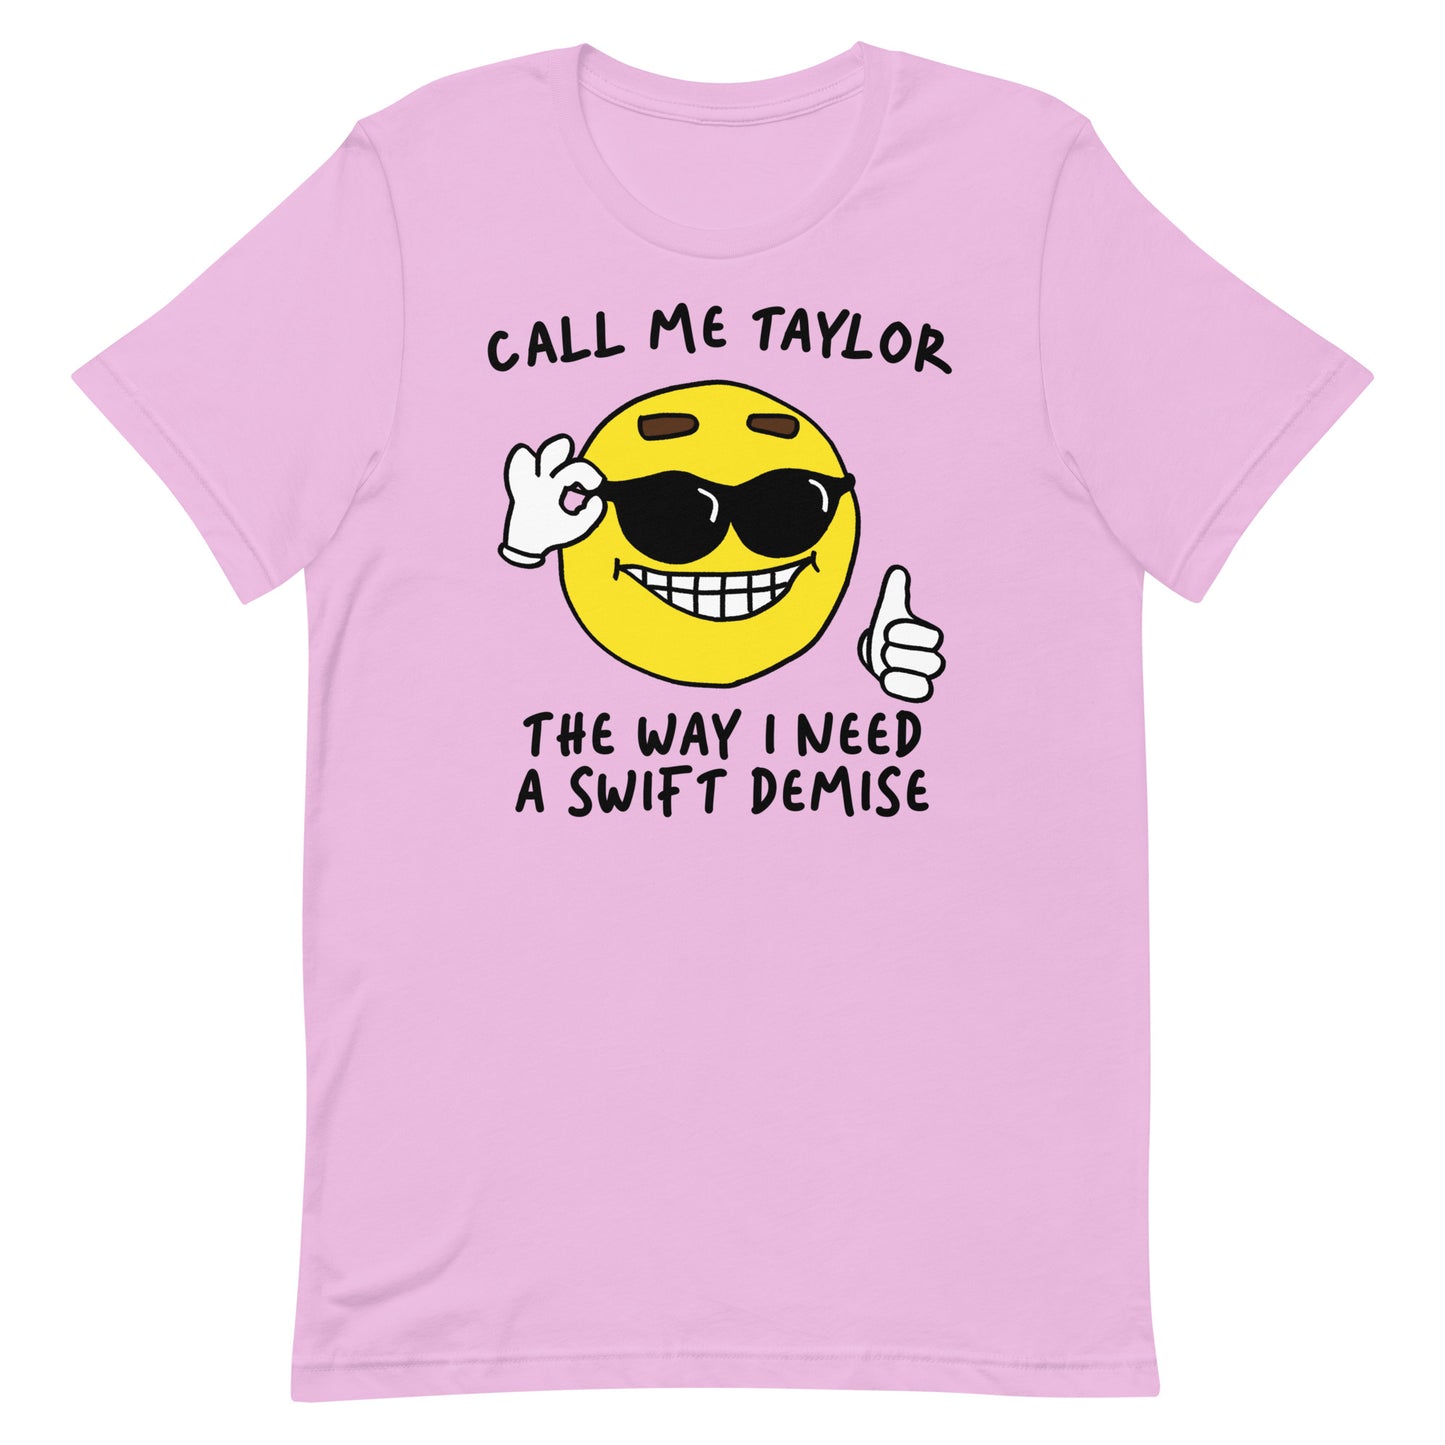 Call Me Taylor the Way I Need a Swift Demise Unisex t-shirt